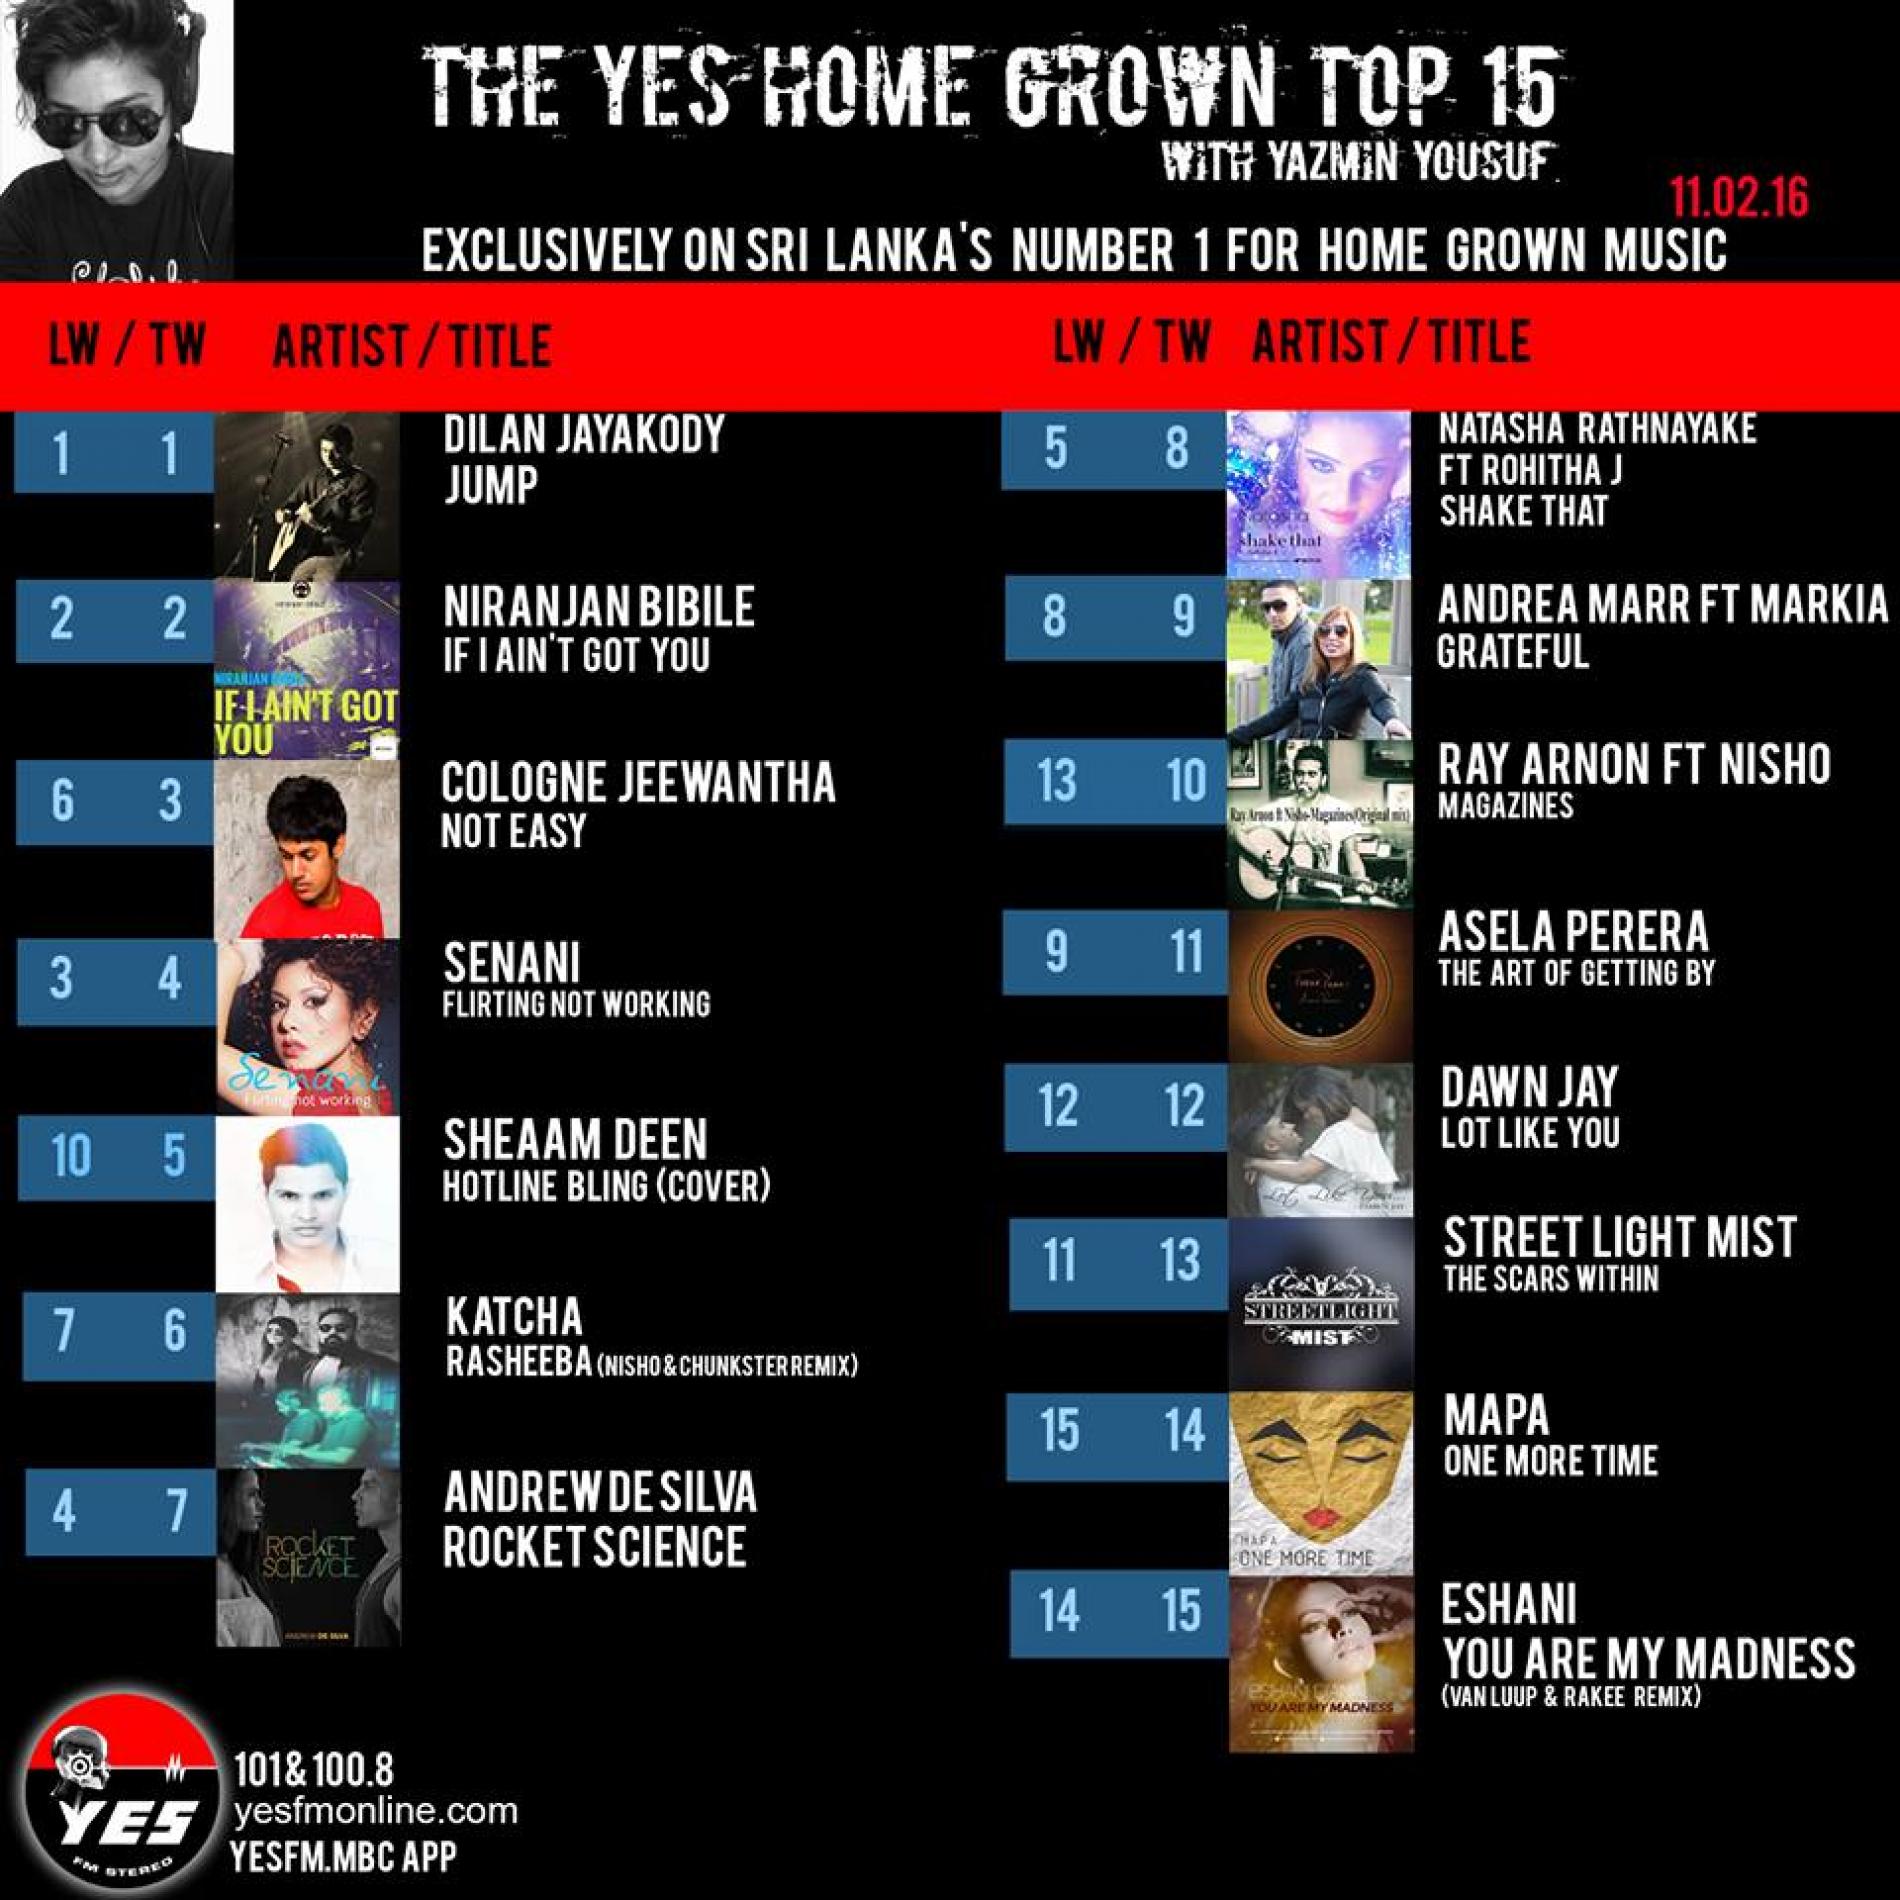 Its Week 4 For Dilan Jayakody On The YES Home Grown Top 15